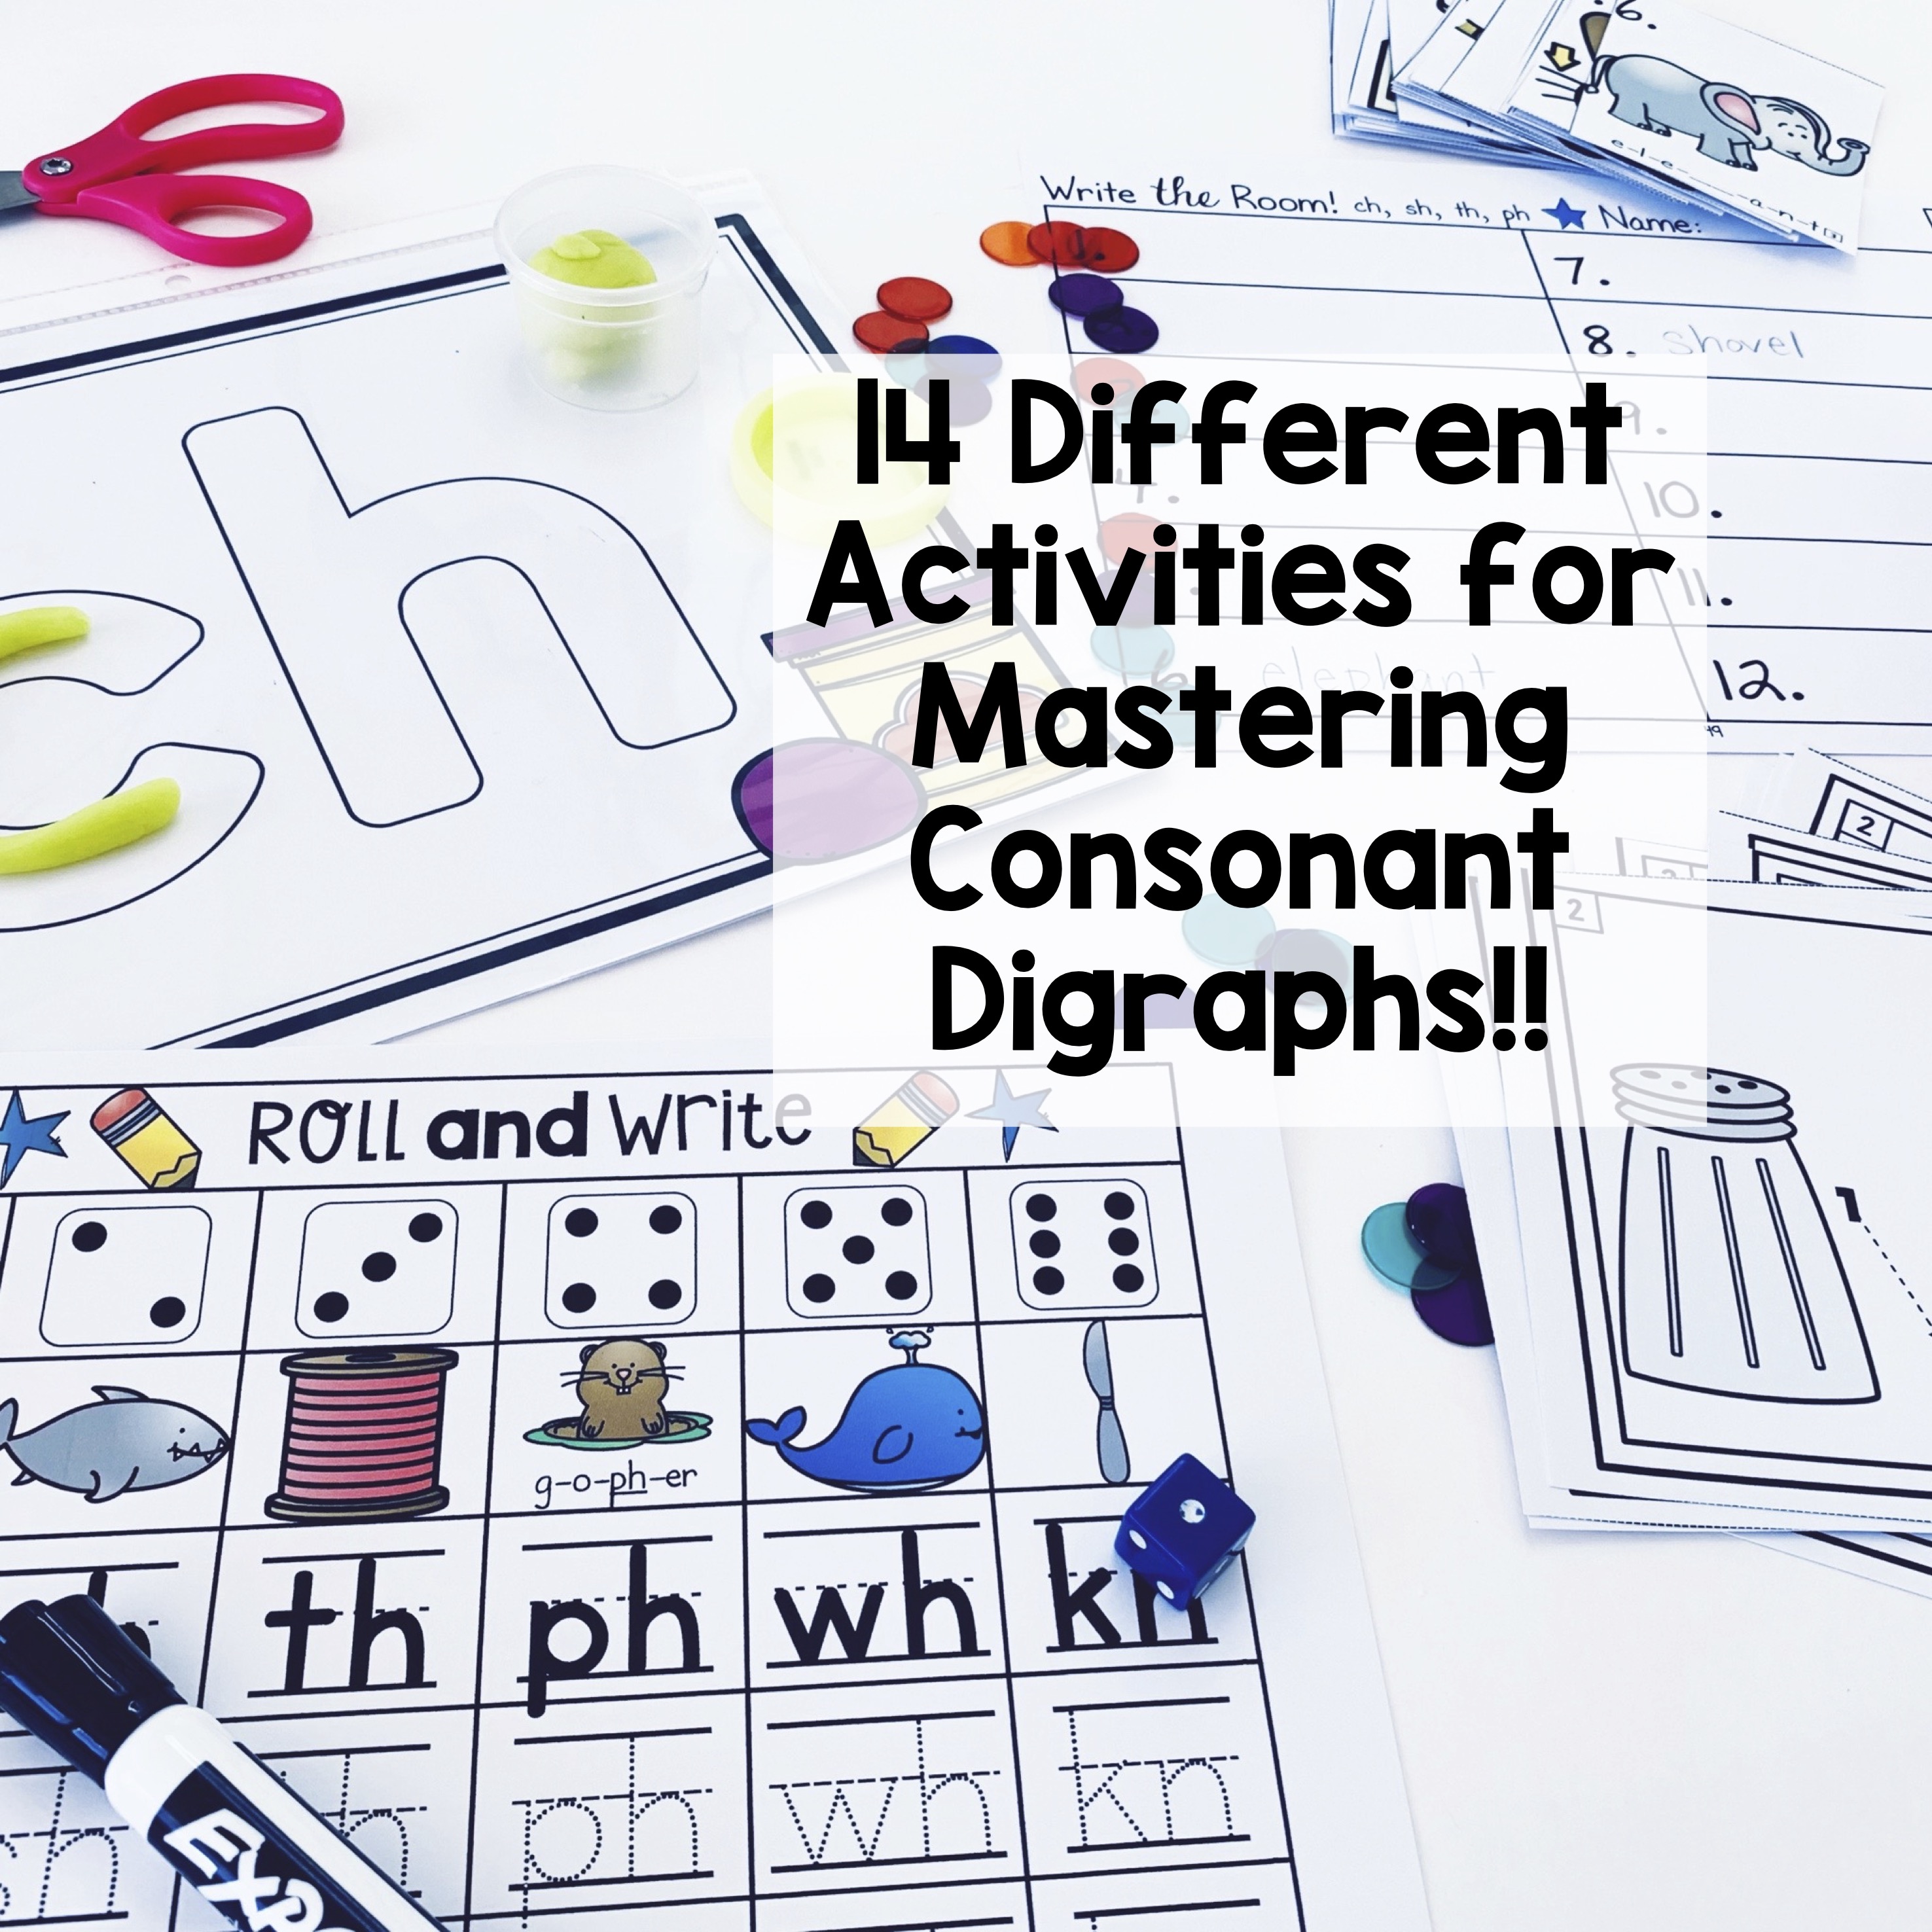 Consonant Digraph sh - final sound - Studyladder Interactive Learning  Games